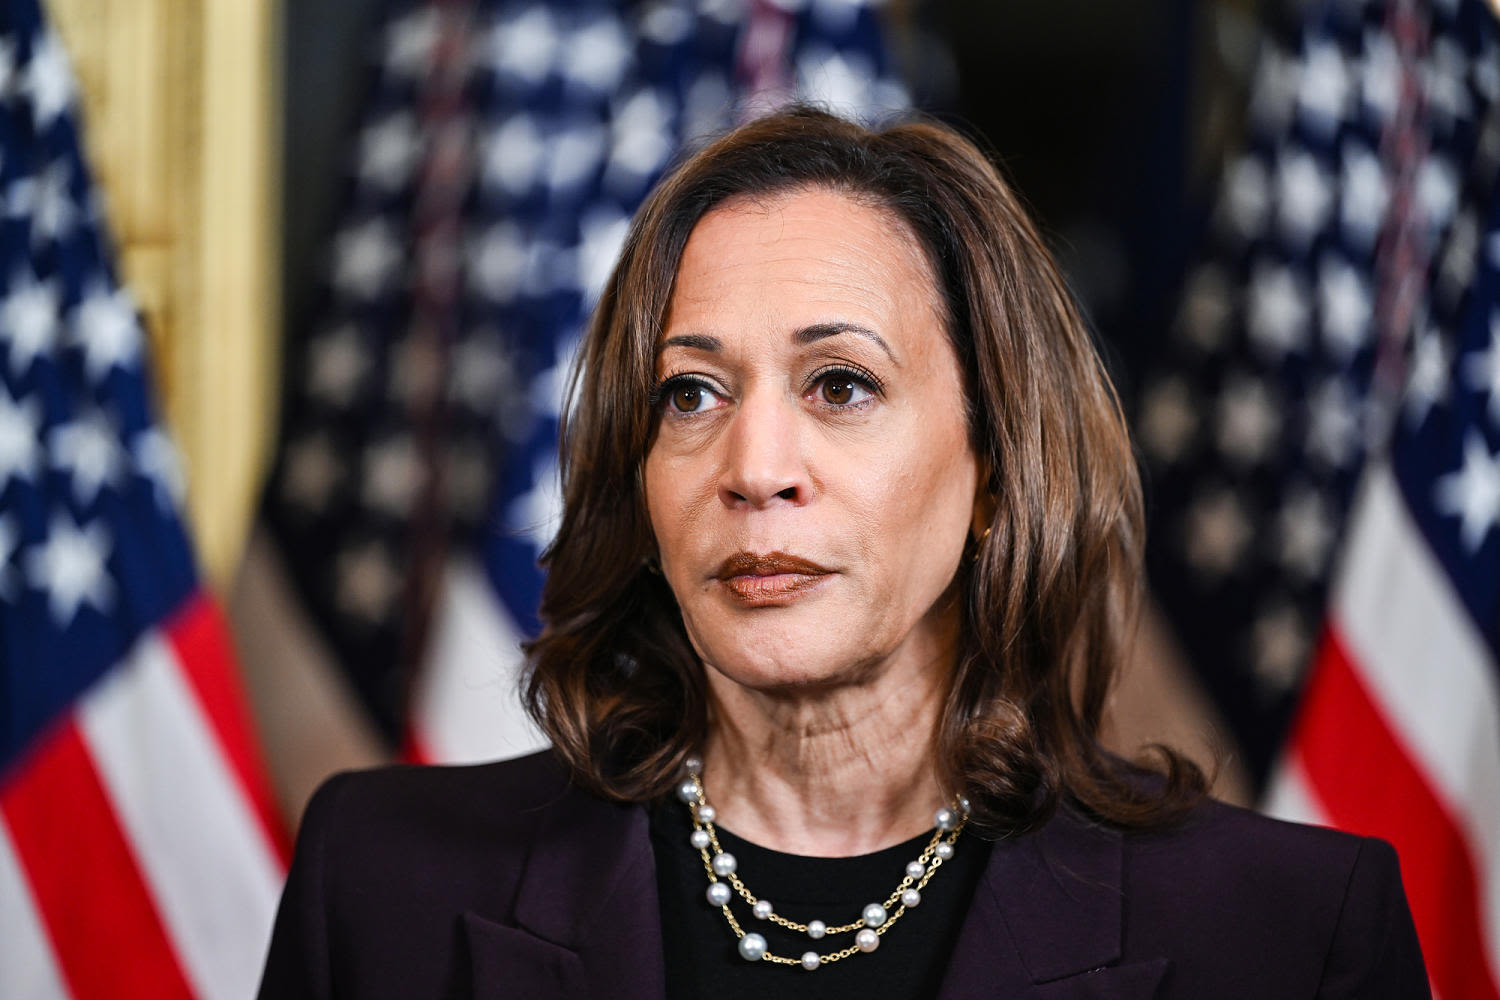 Trump says Harris would be 'like a play toy' to world leaders if elected